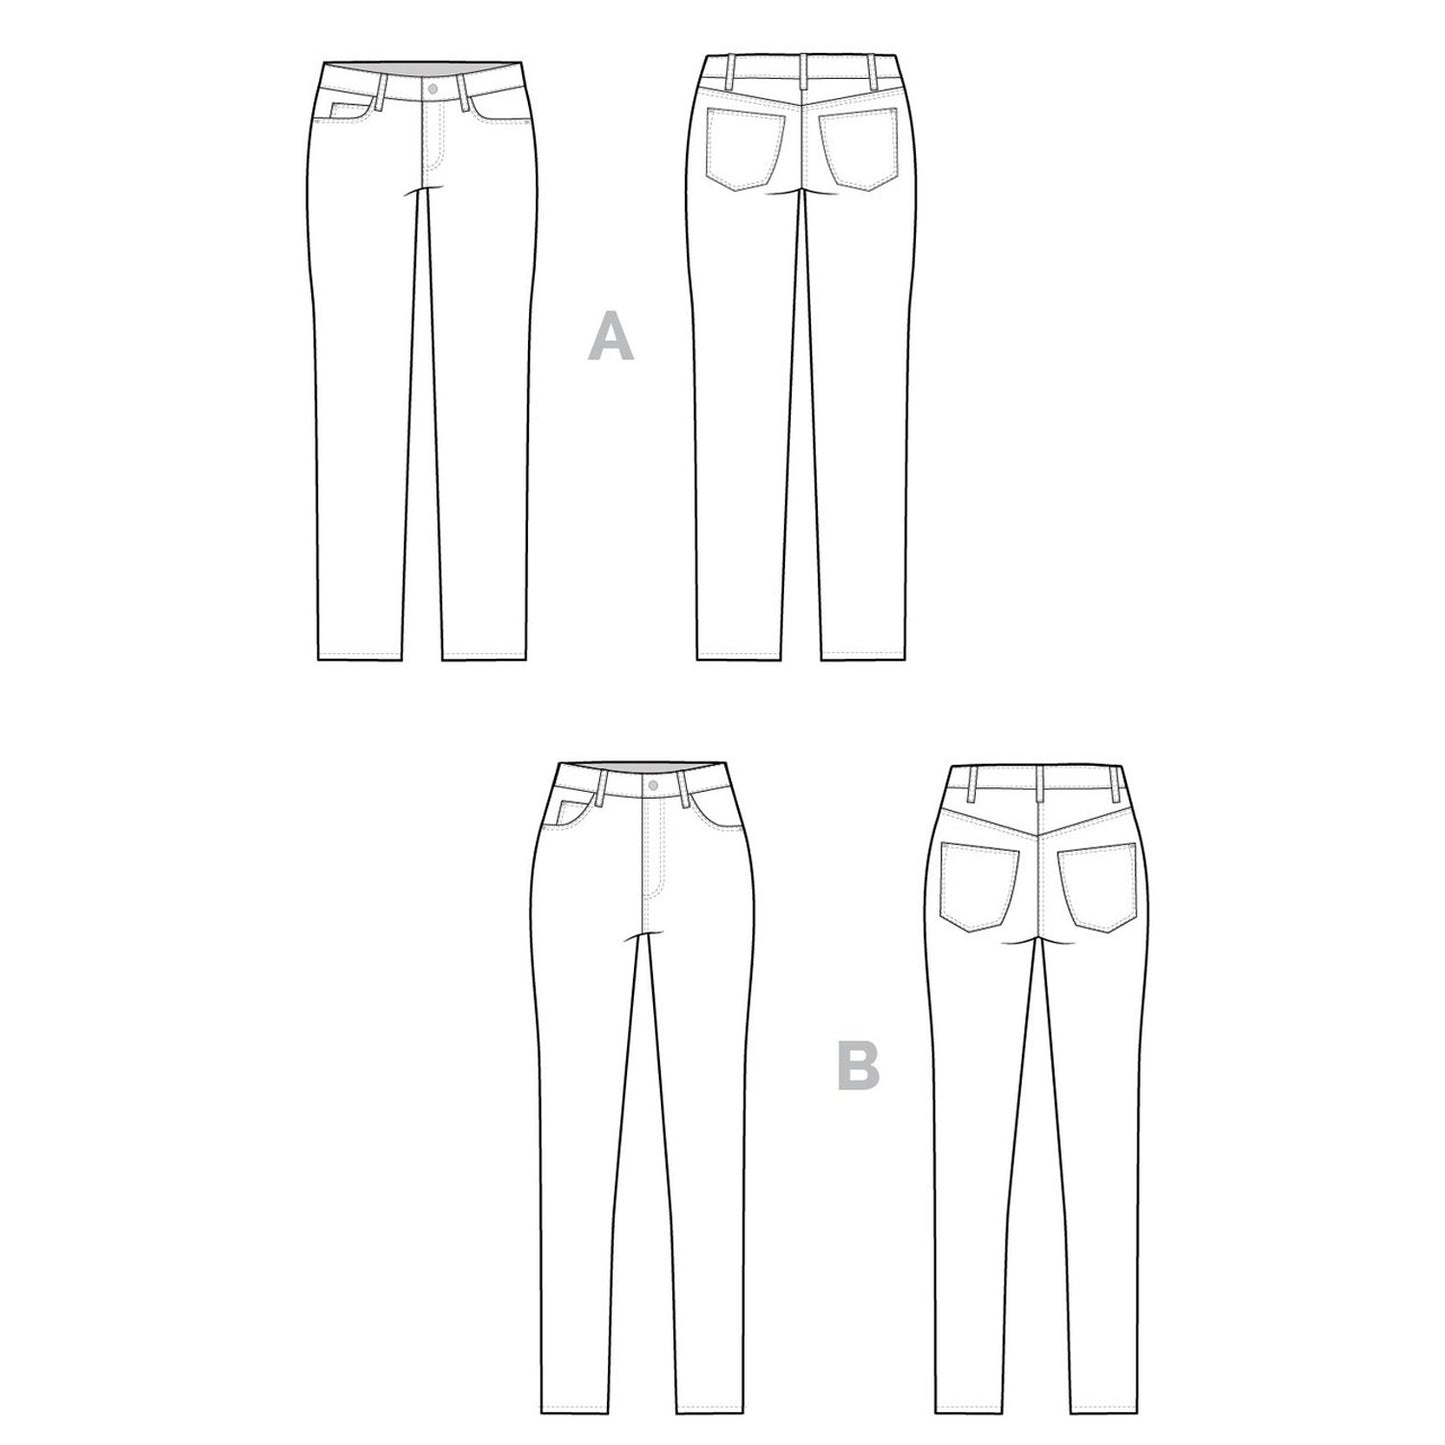 Ginger Jeans Sewing Pattern - Closet Core Patterns